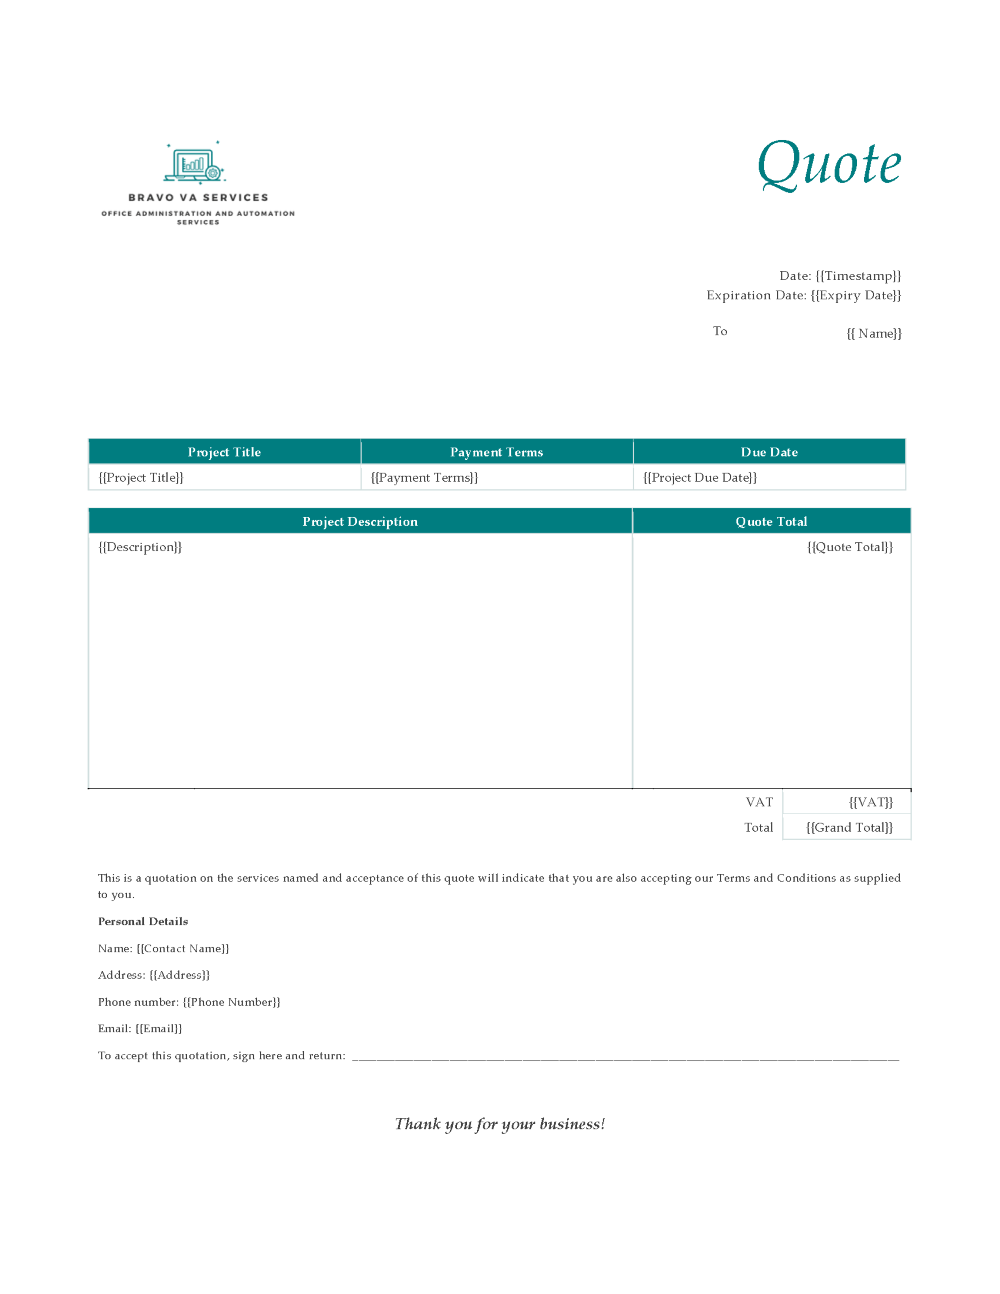 Quote Template for Mail Merge